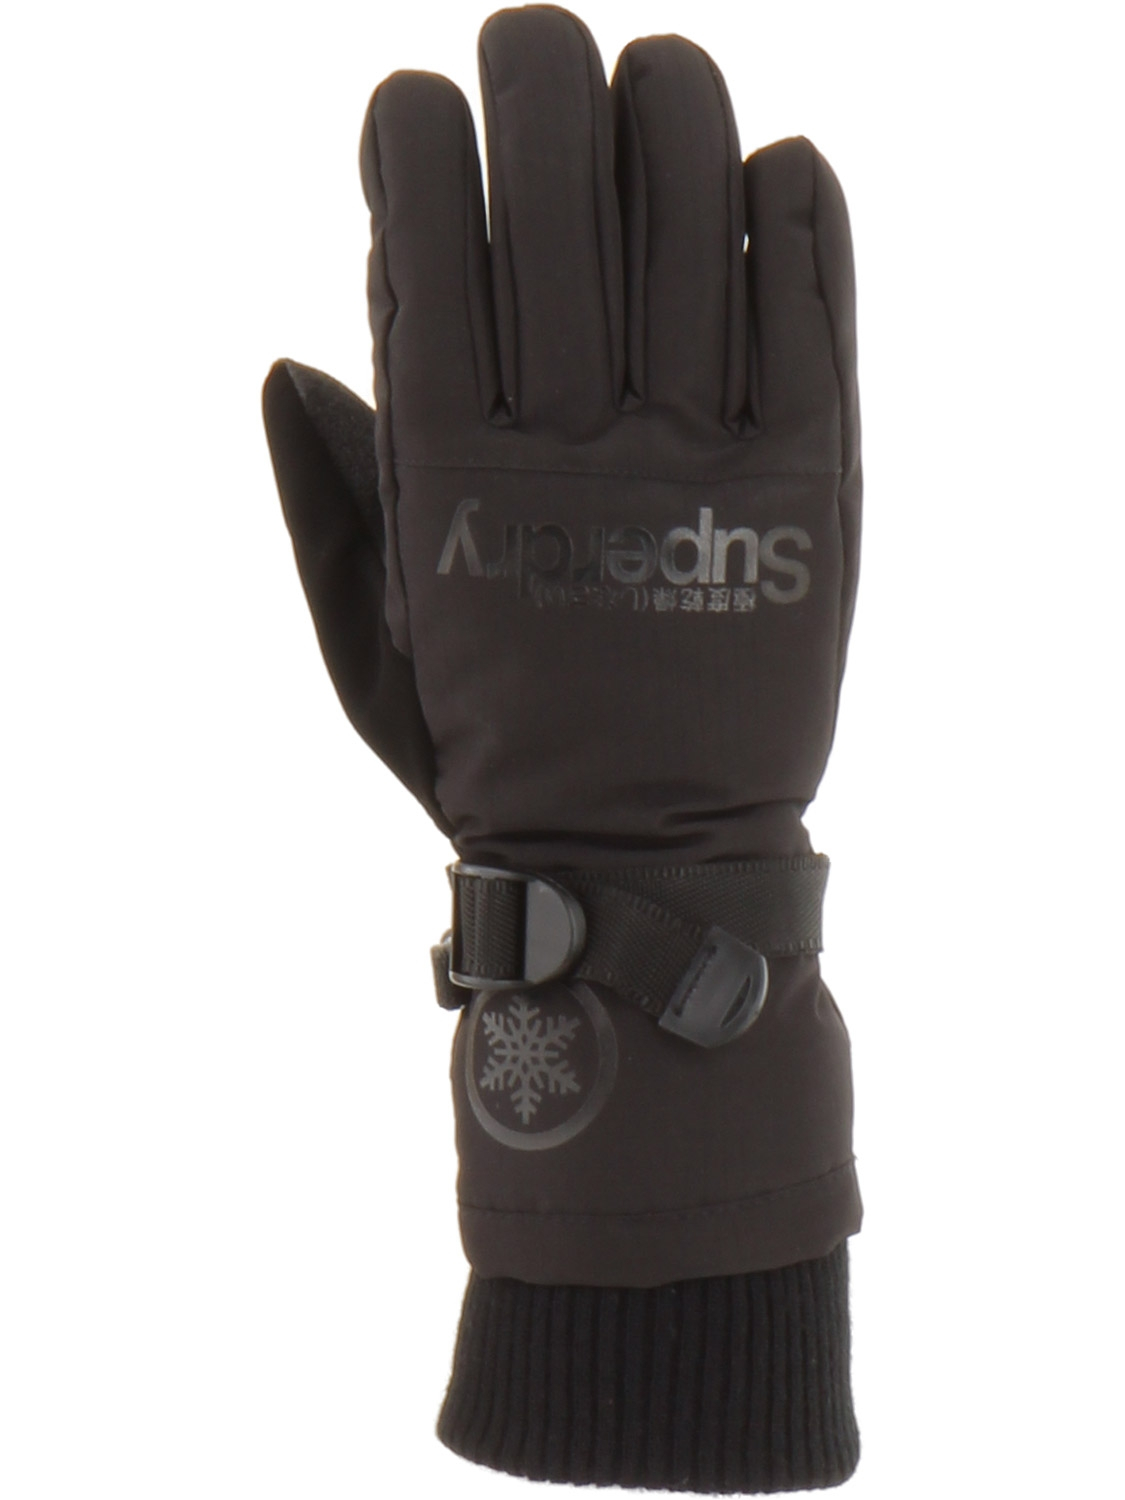 Superdry Womens Ultimate Snow Service Glove Black - Size: 12-14